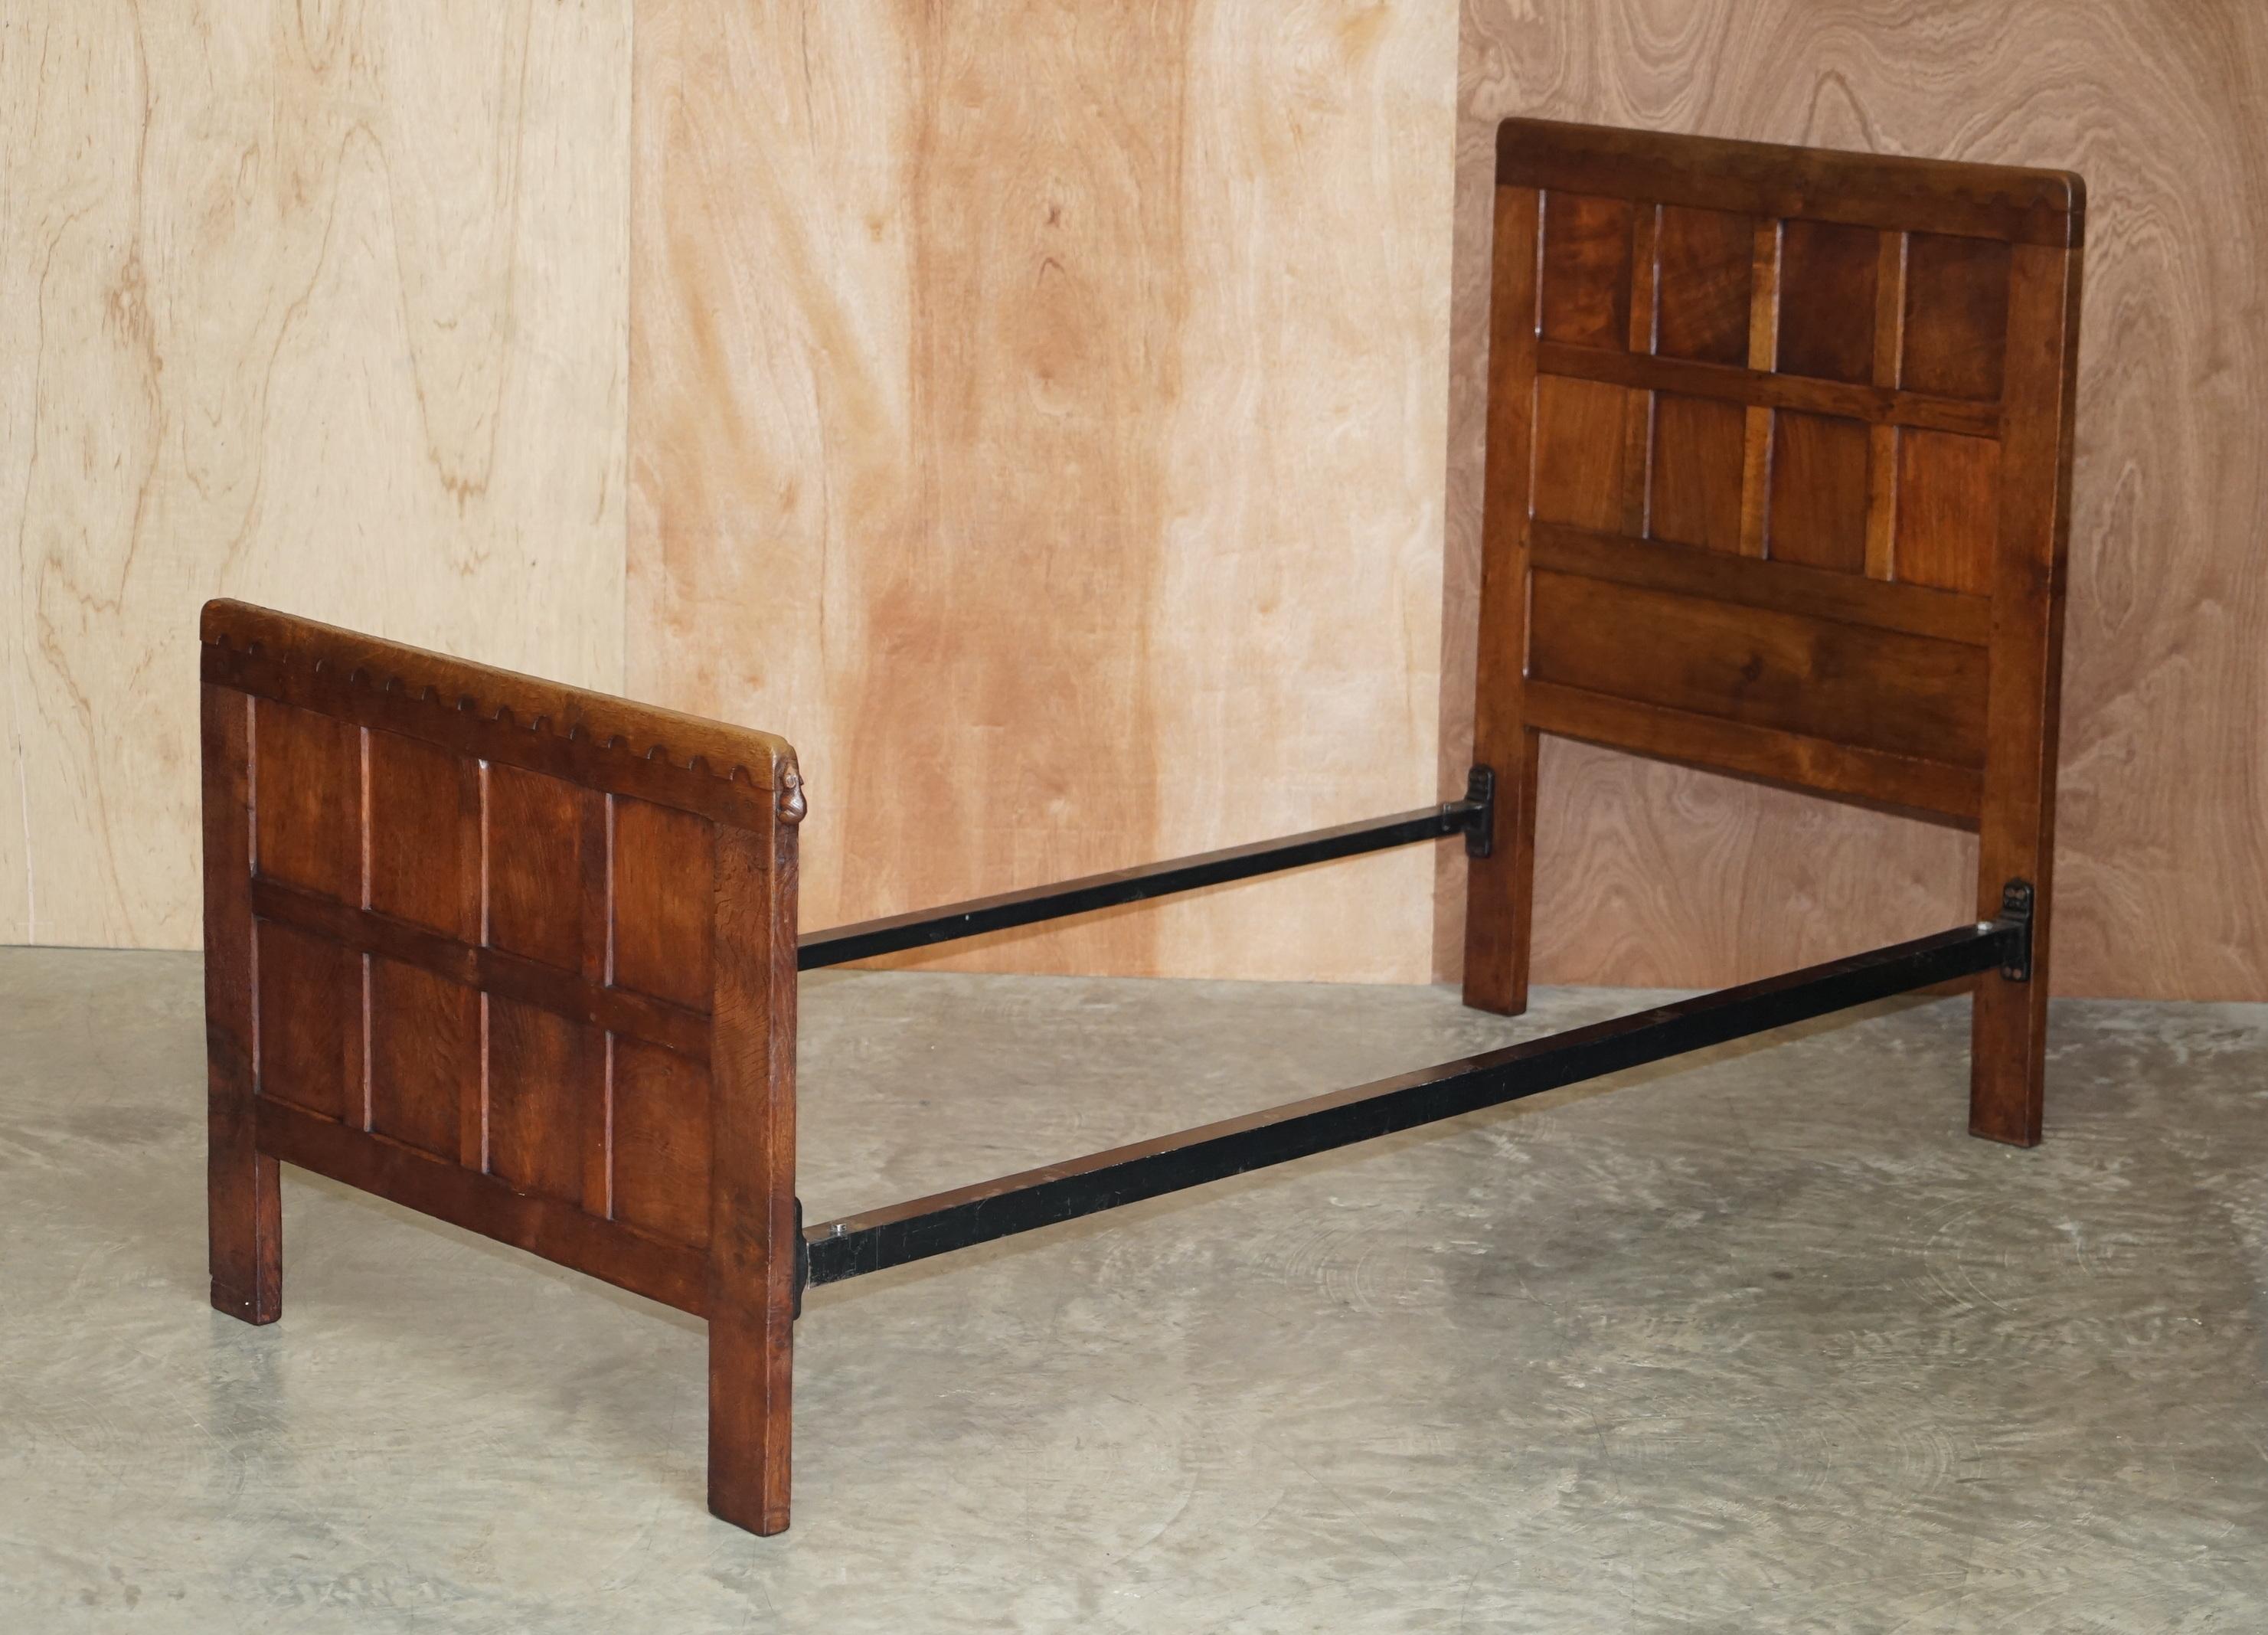 We are delighted to offer for sale this very rare highly collectable Robert Mouseman Thompson Burr Oak single bed frame circa 1930’s

A very rare circa 1930’s piece with the highly collectable burr oak frame. These beds almost never come up for